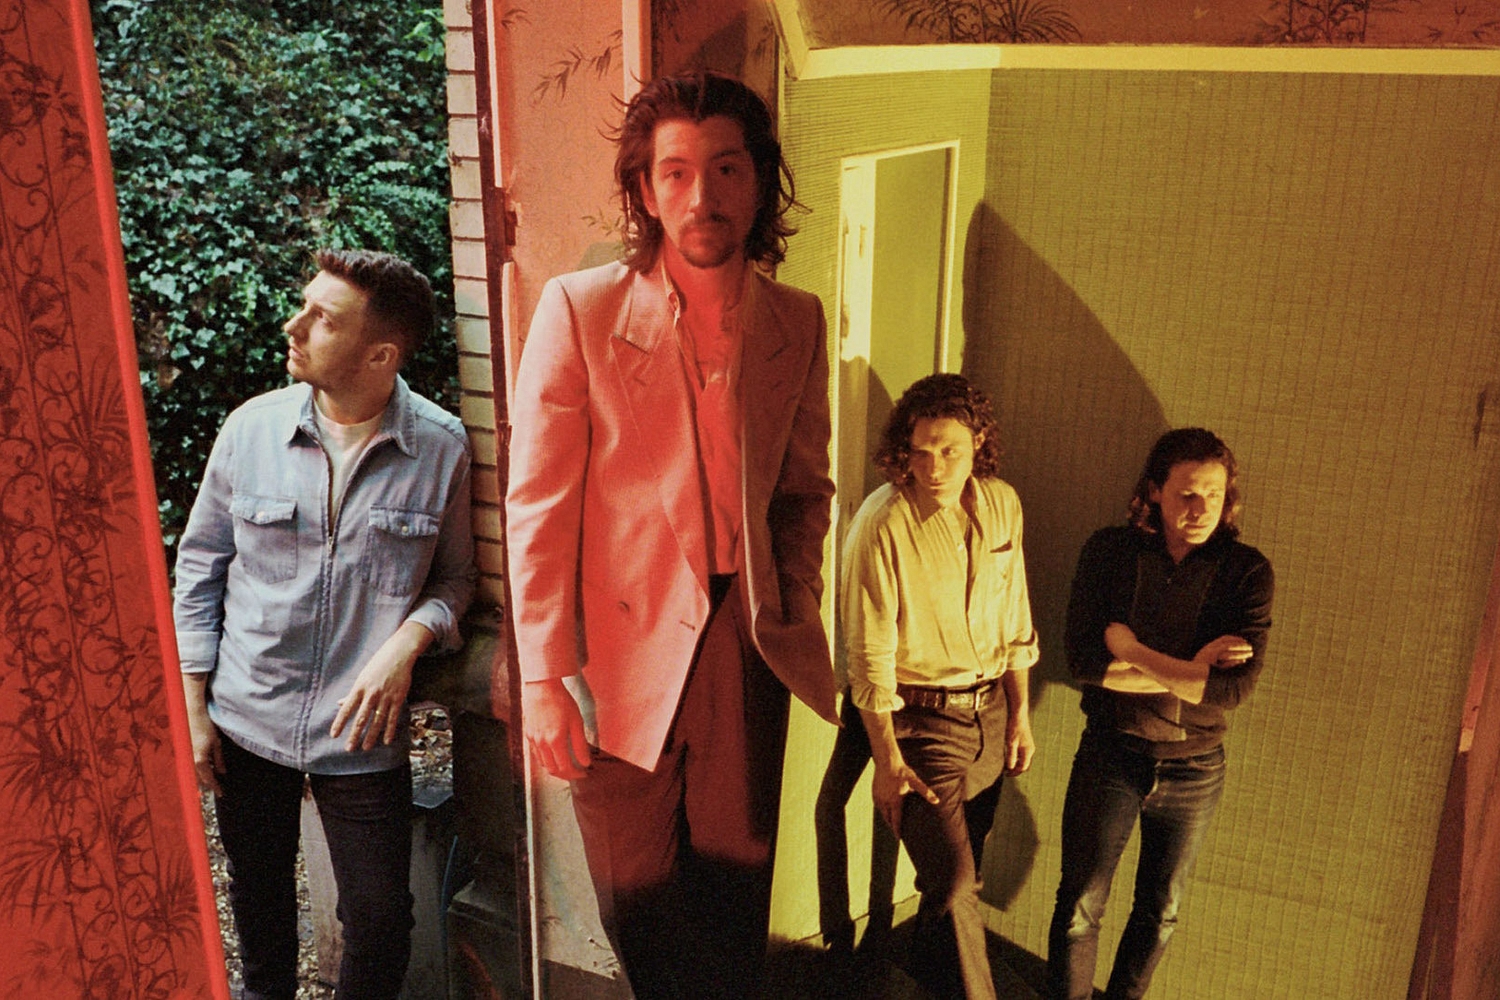 Arctic Monkeys won’t be sharing any songs before the release of ‘Tranquility Base Hotel & Casino’